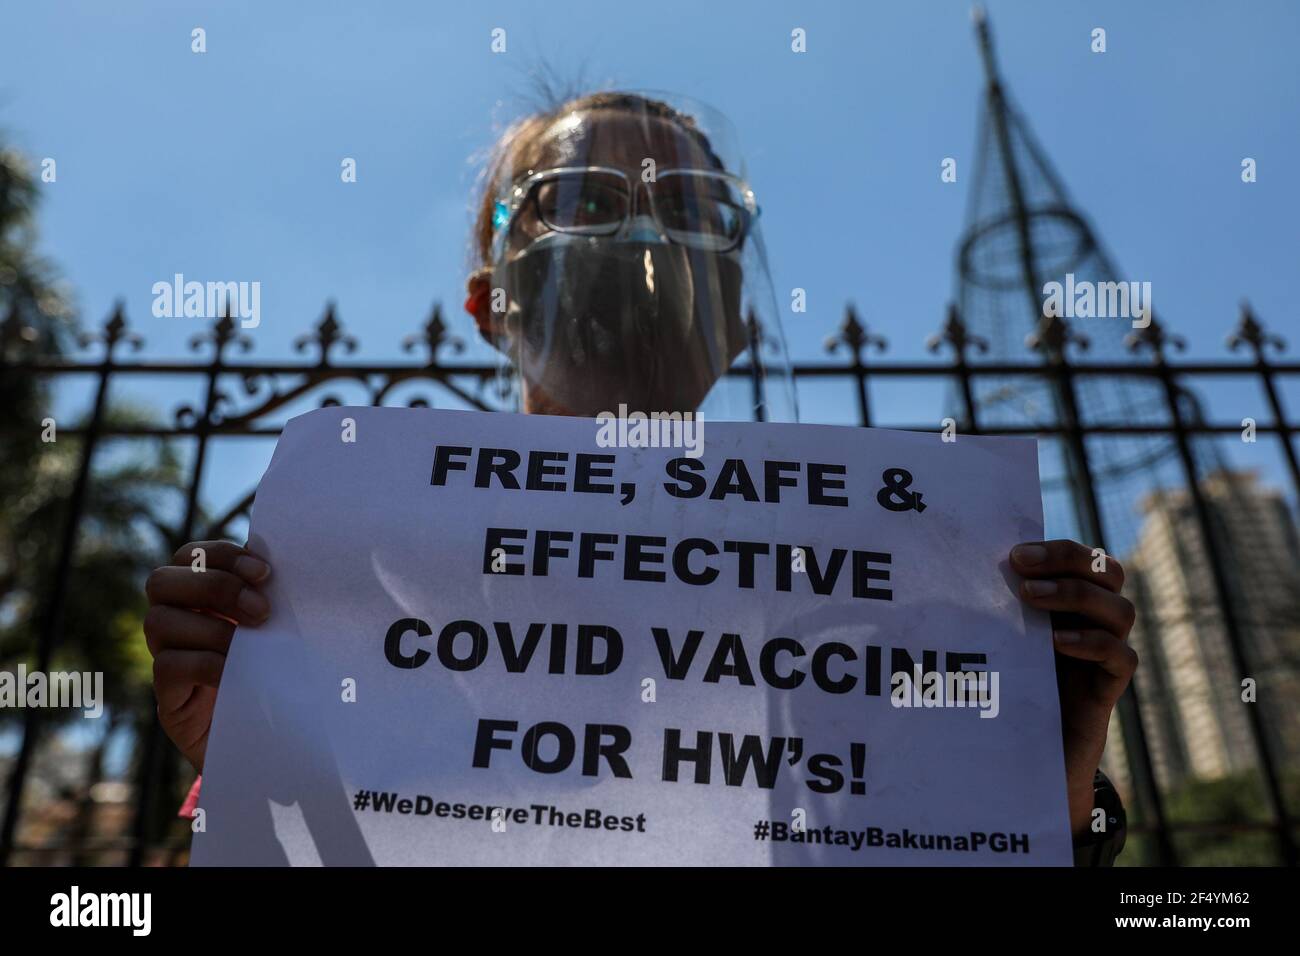 Healthcare workers call for a free, safer and effective COVID-19 vaccine during a protest outside the Philippine General Hospital in Manila. Activists along with medical workers and students demanded for a free and safer COVID-19 vaccine for health care workers, who continue to be at risk amid the surge of coronavirus cases in the country. The government, meanwhile, faced criticism for failing to immediately launch a vaccination program, leaving the Philippines the only ASEAN member with no COVID-19 vaccines that is expected to arrive in late February. Philippines. Stock Photo